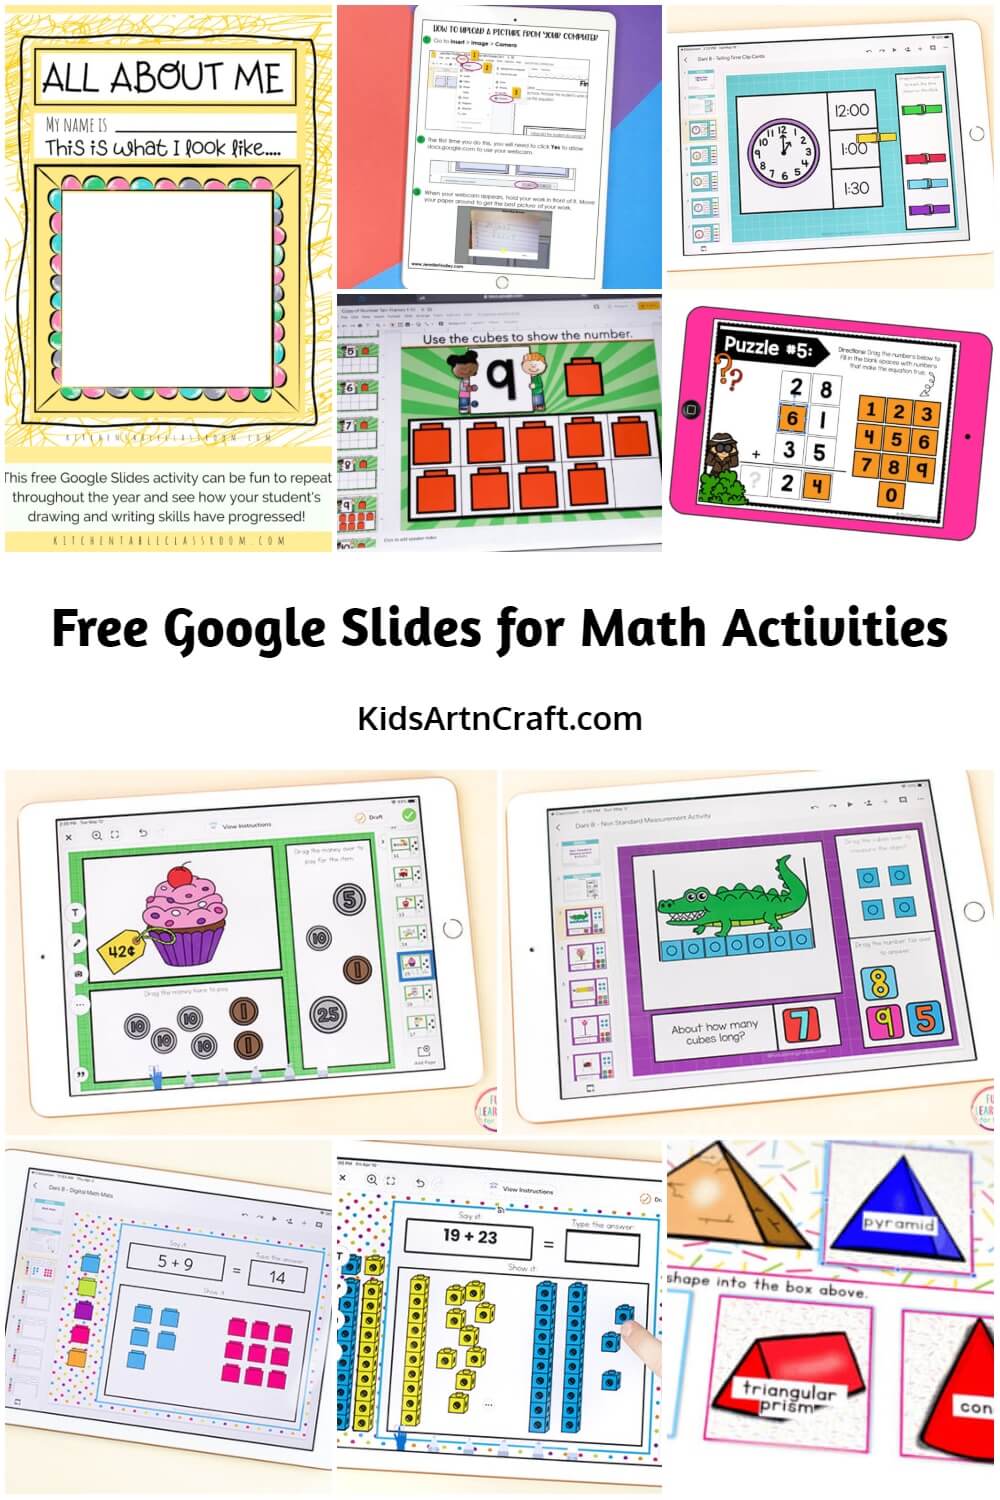 Free Google Slides for Math Activities